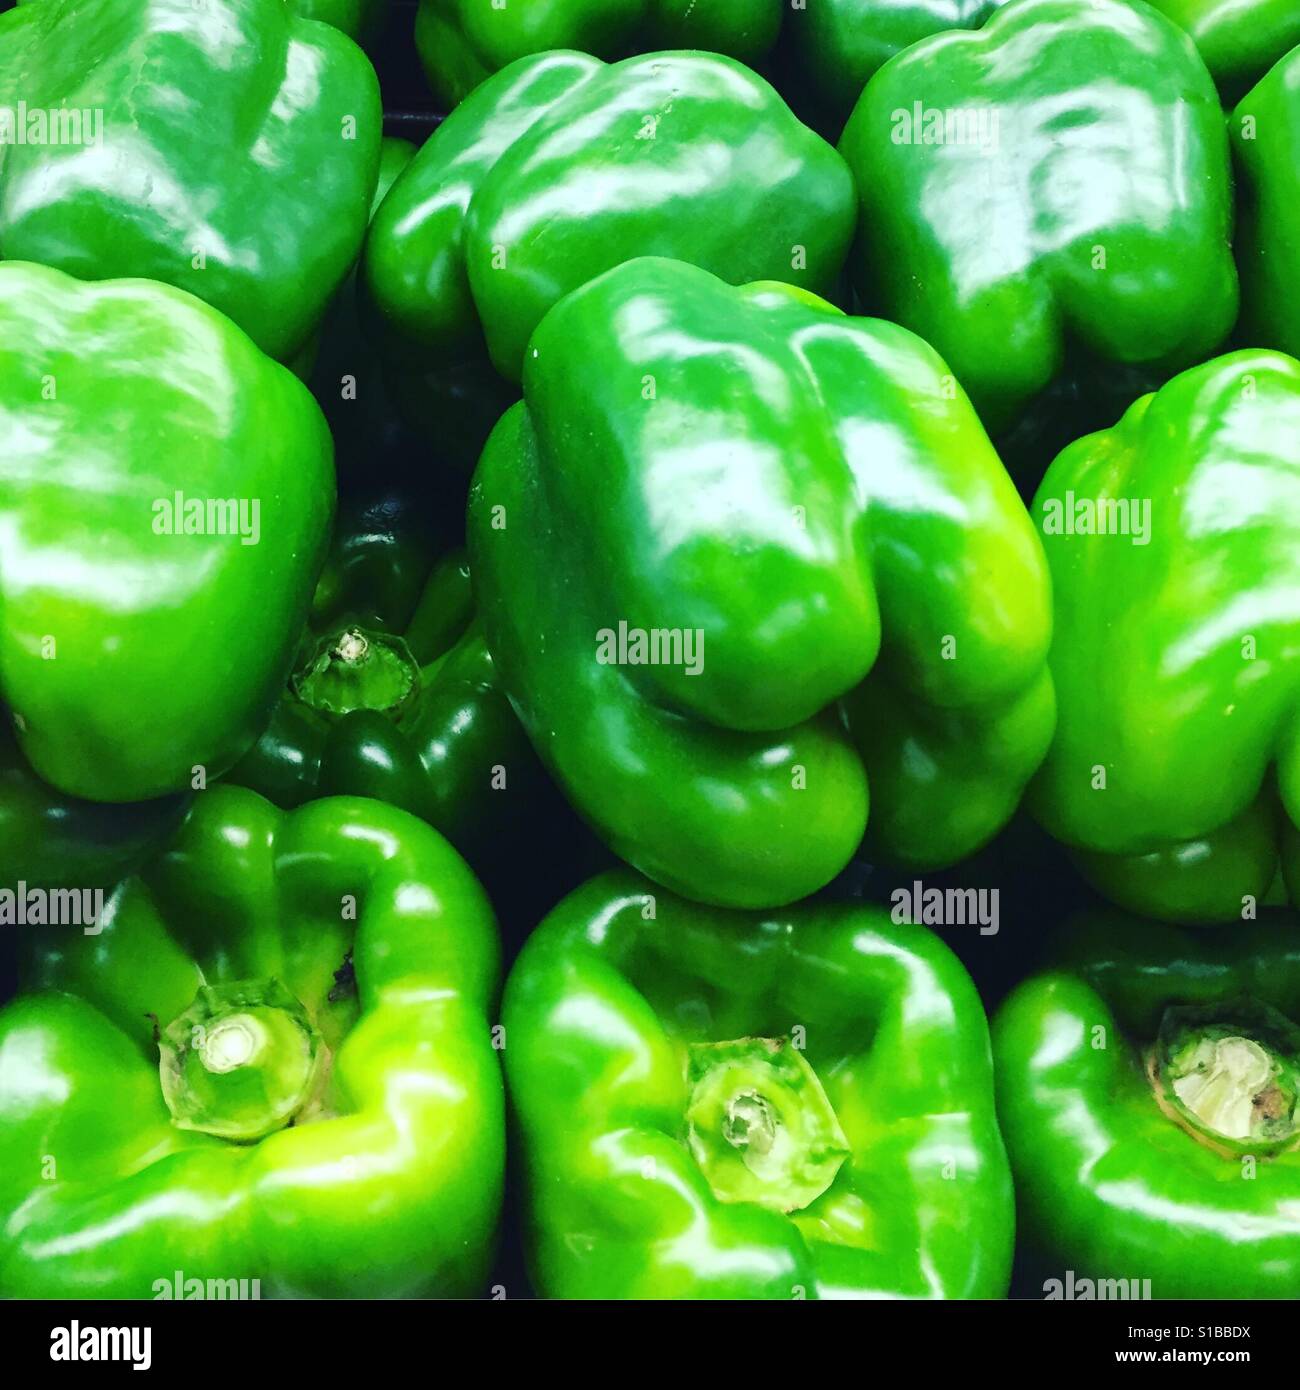 Green peppers by K.R. Stock Photo